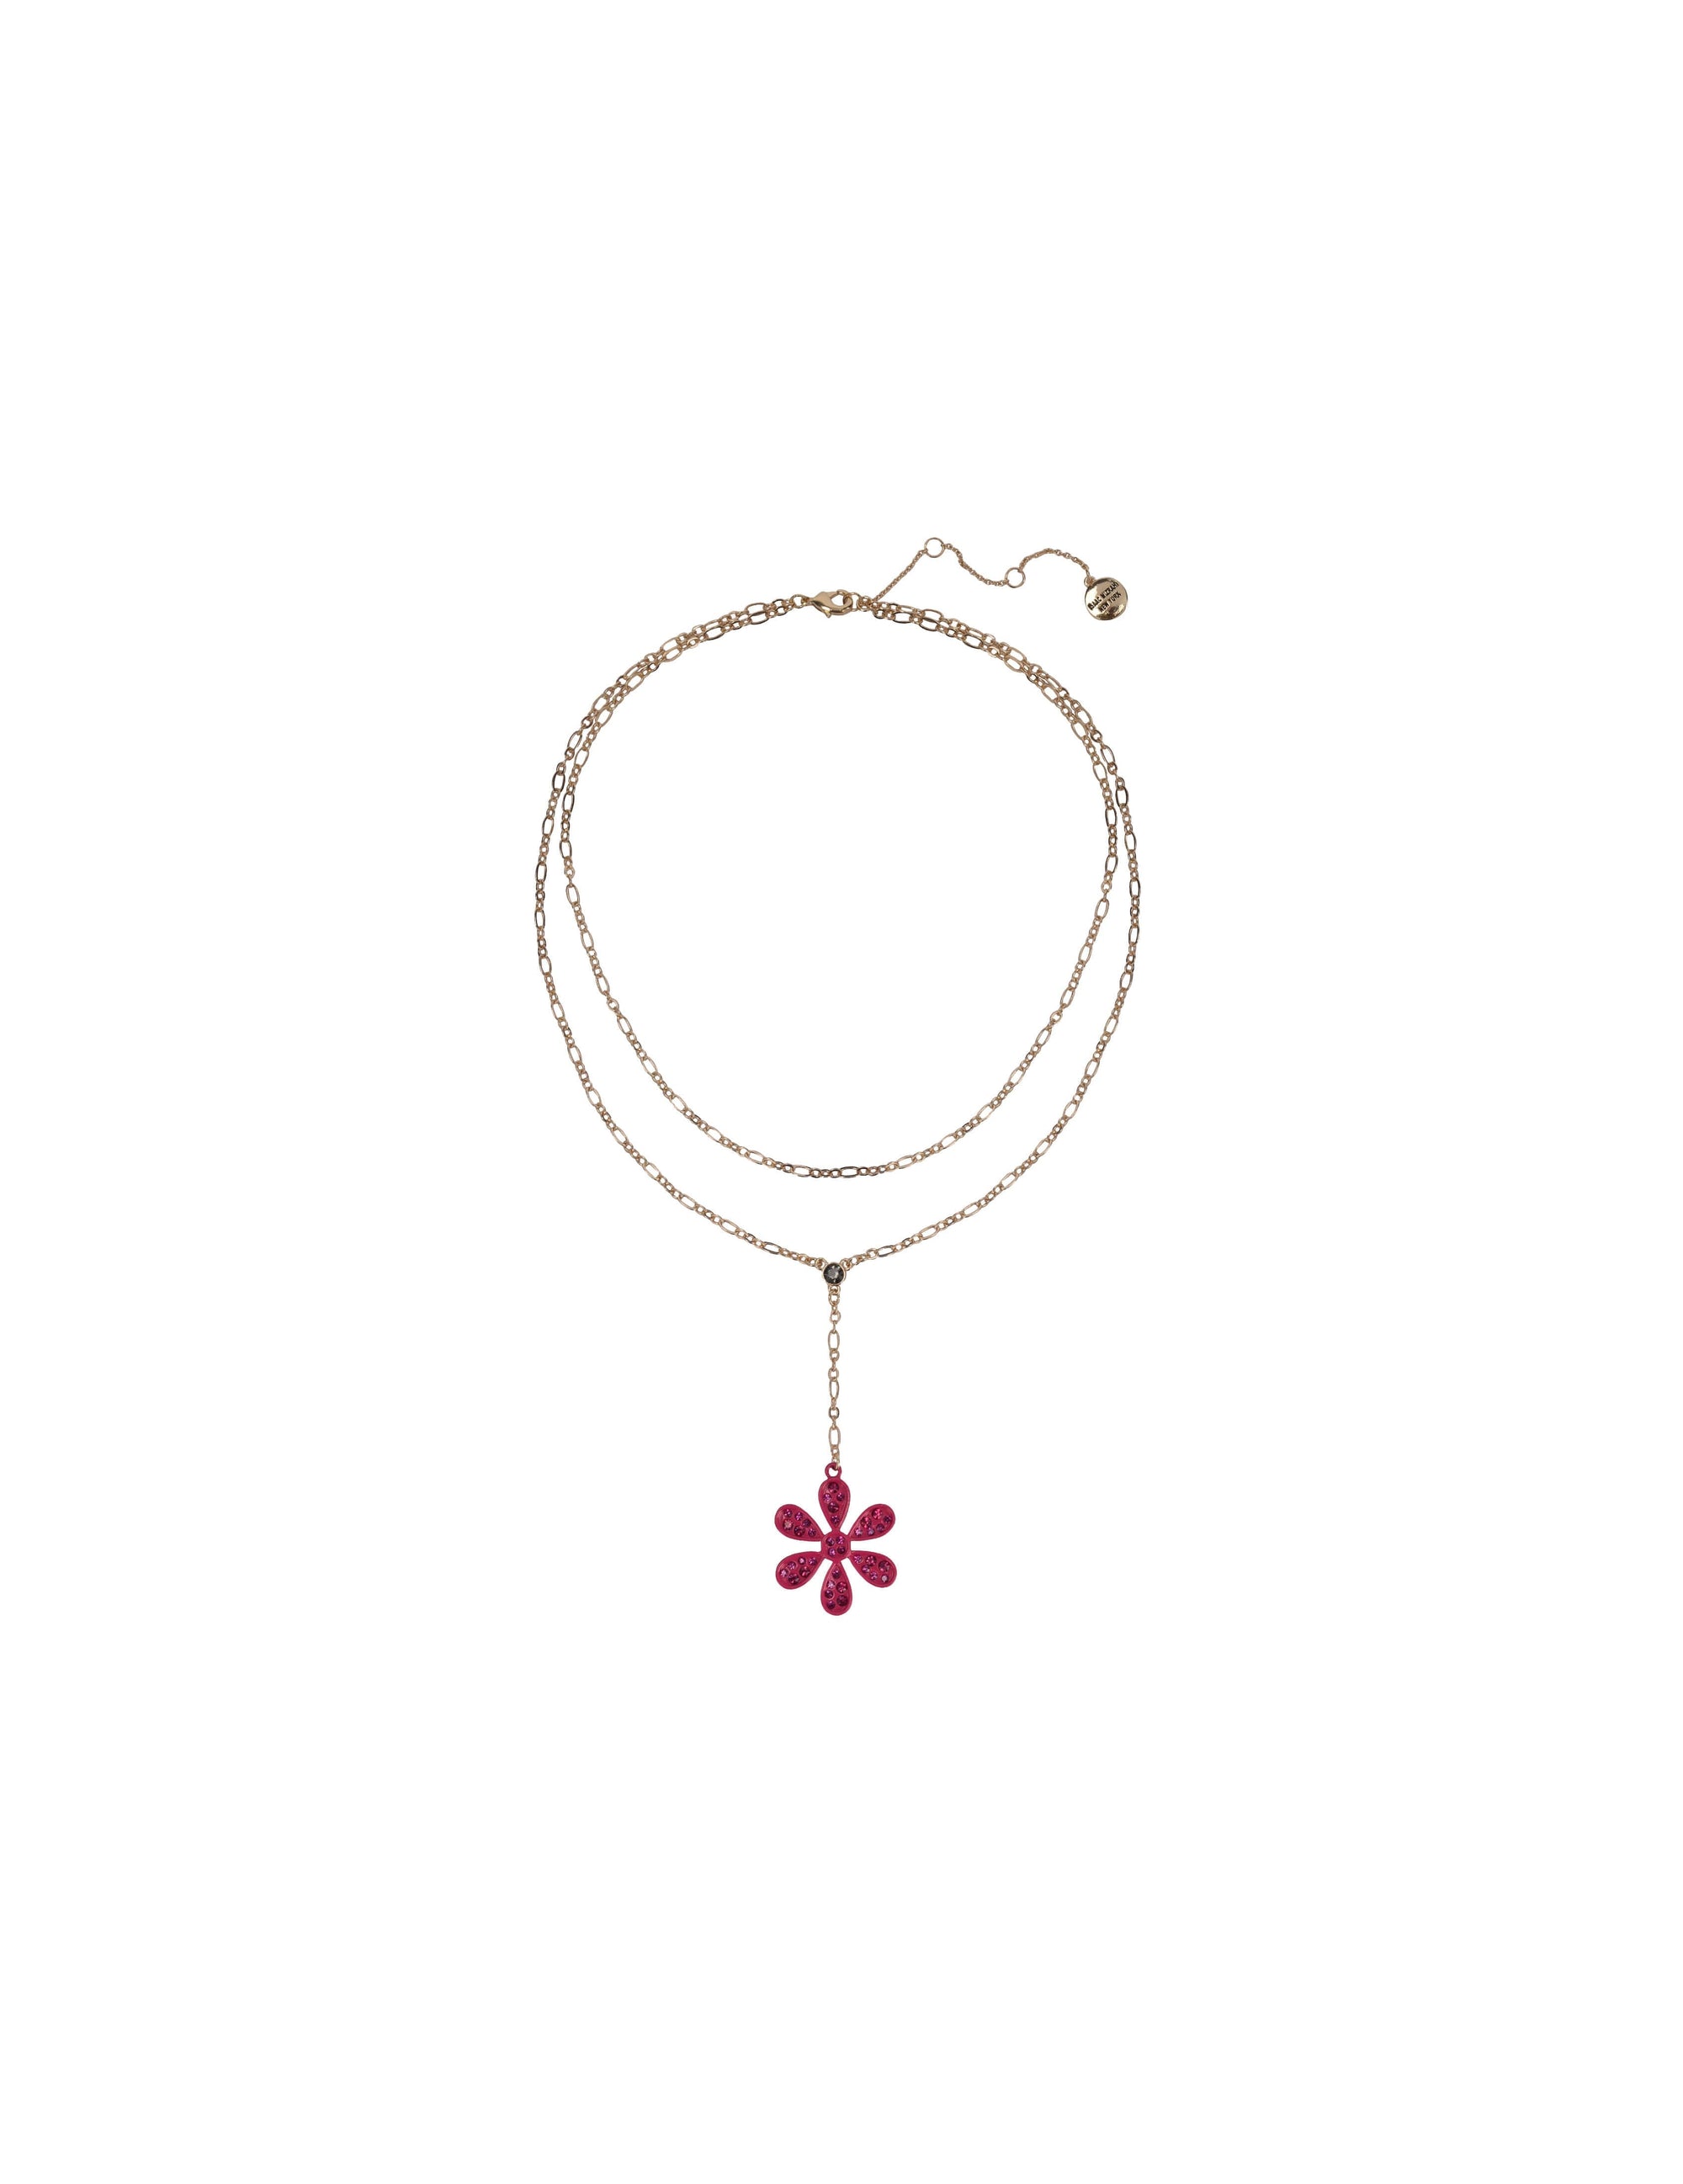 2 Row Gold Tone and Pink Flower Pendant Necklace